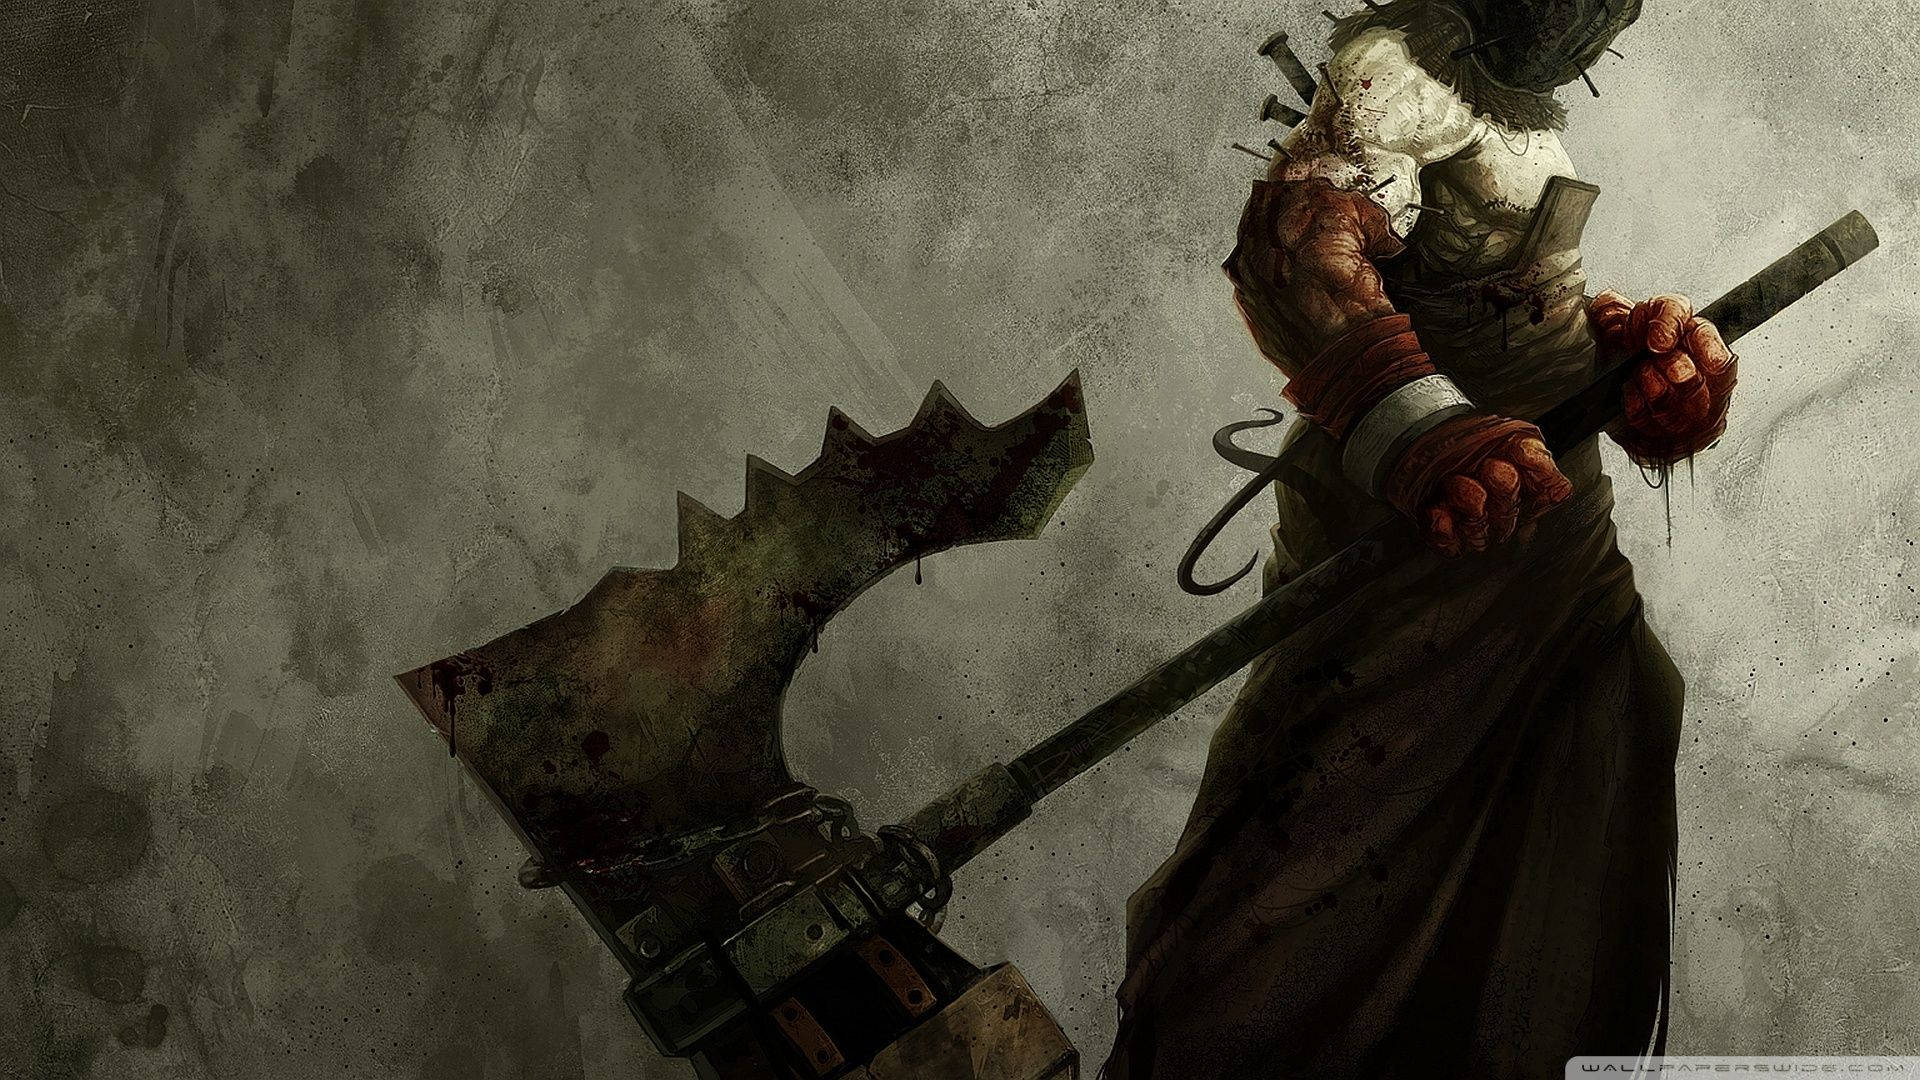 Zombie Executioner from the popular video game Resident Evil Wallpaper